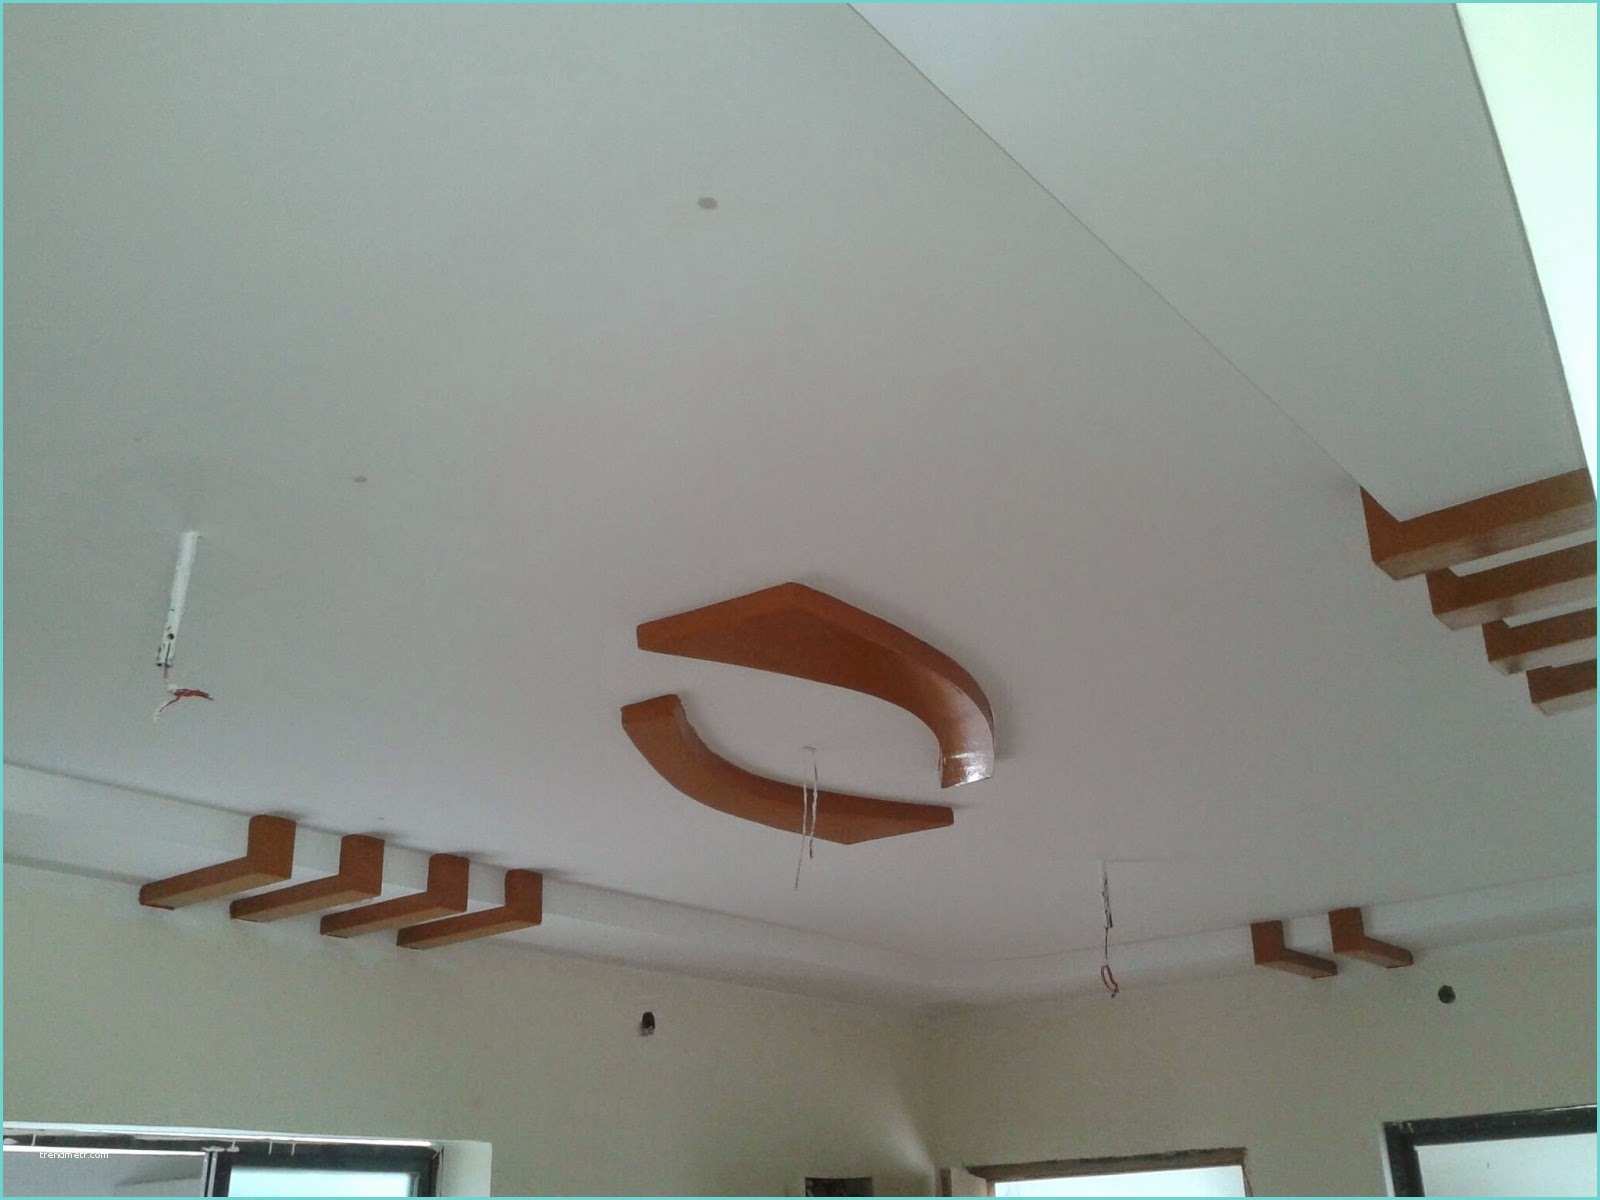 Pop Design for Hall Roof Hall Pop Ceiling Designs for 2 Fans Home Bo